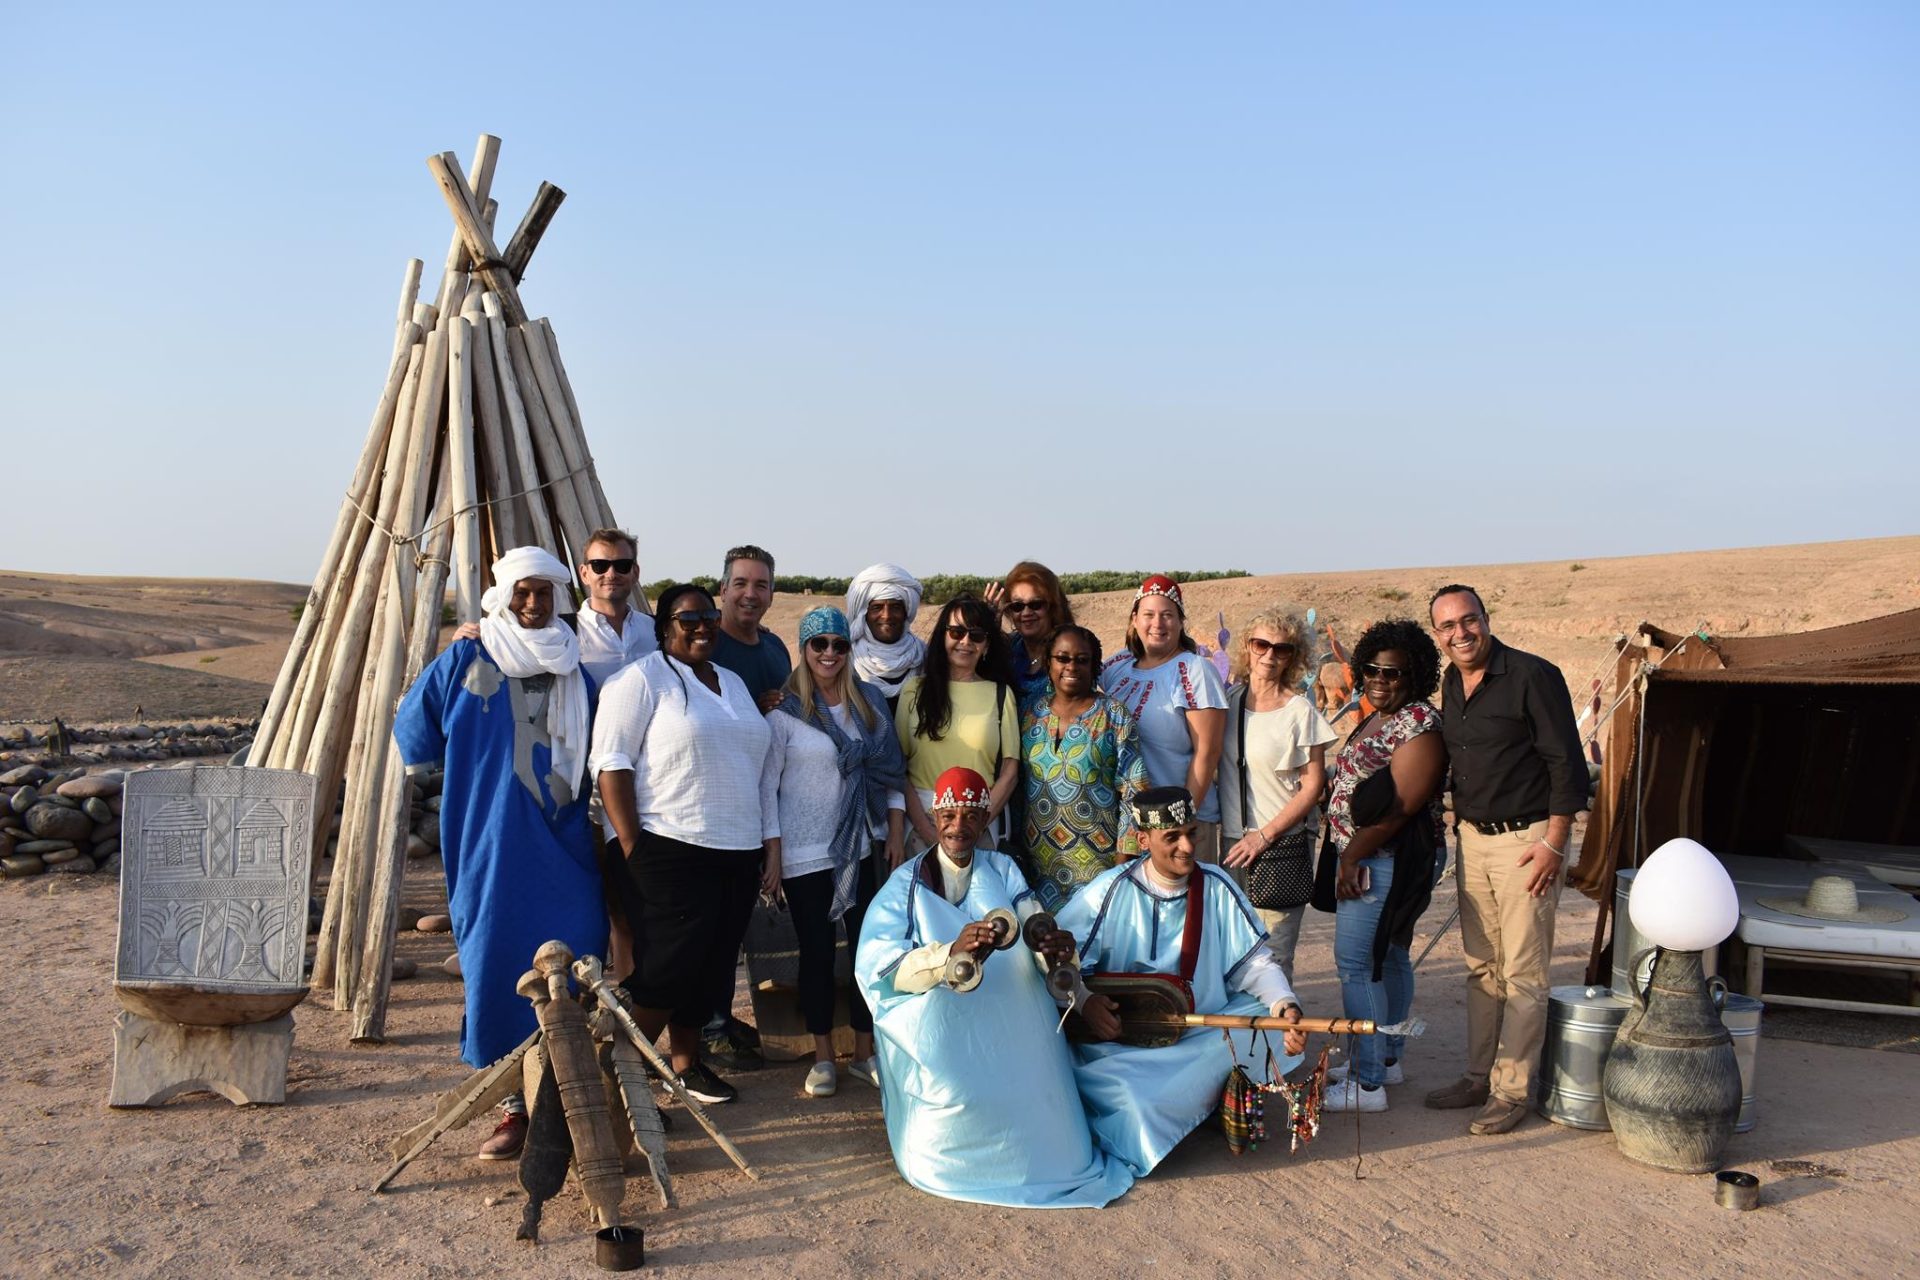 Members of tour group get a taste of local culture at Agafay Desert Luxury Camp outside of Marrakech.